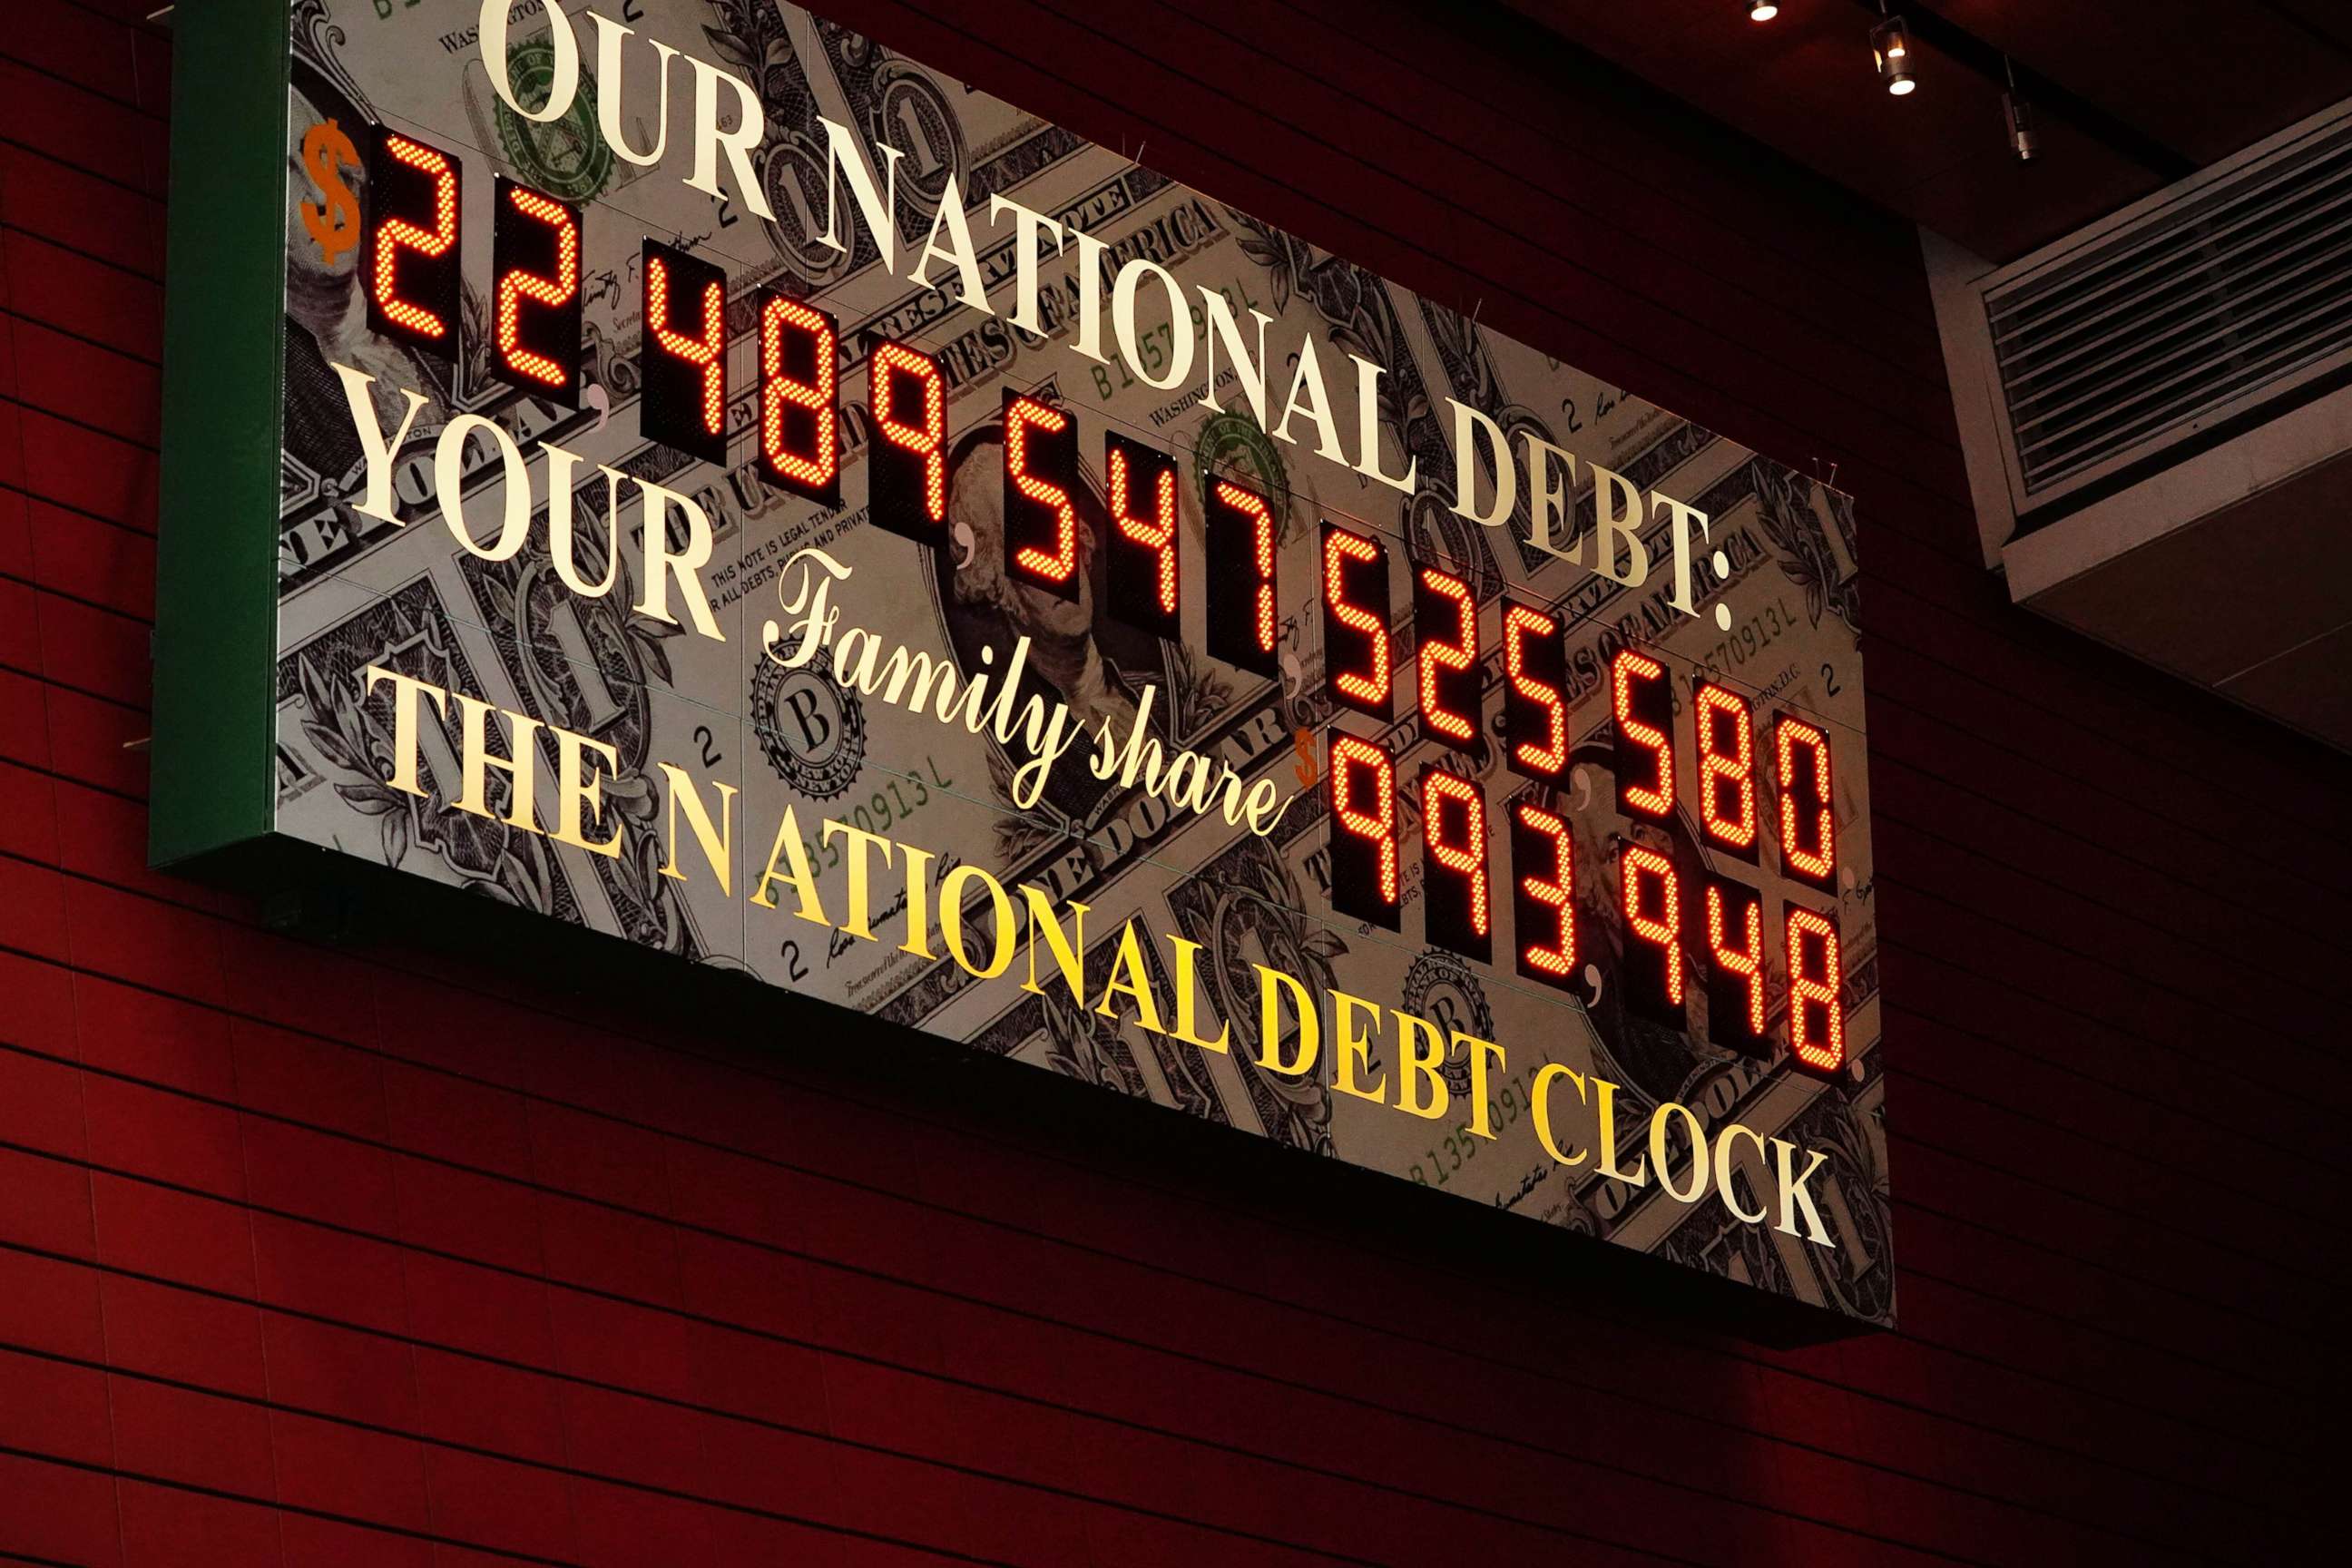 PHOTO: The National Debt Clock is seen in Times Square in New York, May 9, 2020.